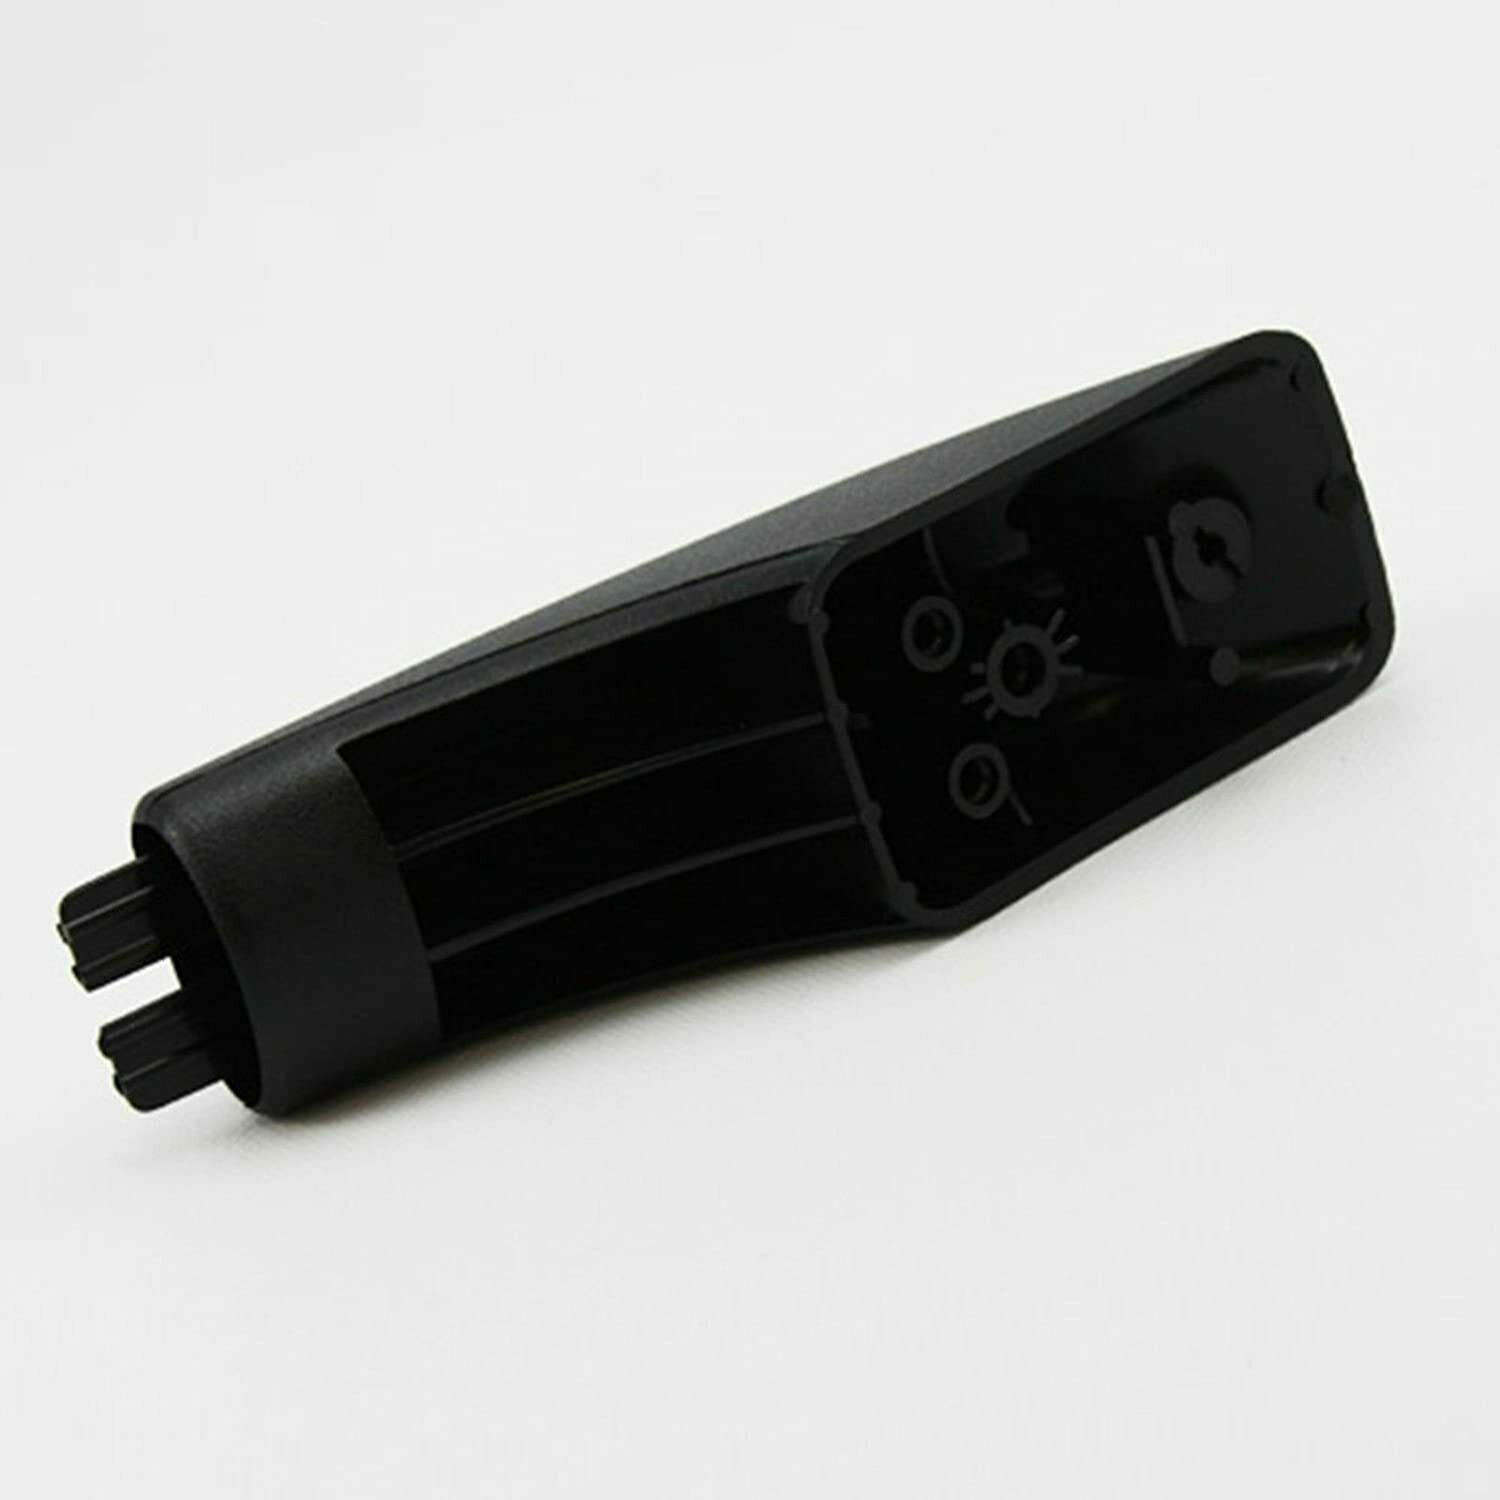 Primary image for Door Handle End Cap For GE JBP66BY2WH JBP24BB1AD JBP64B0B2AD JBP19BB1 JBP78BY5BB